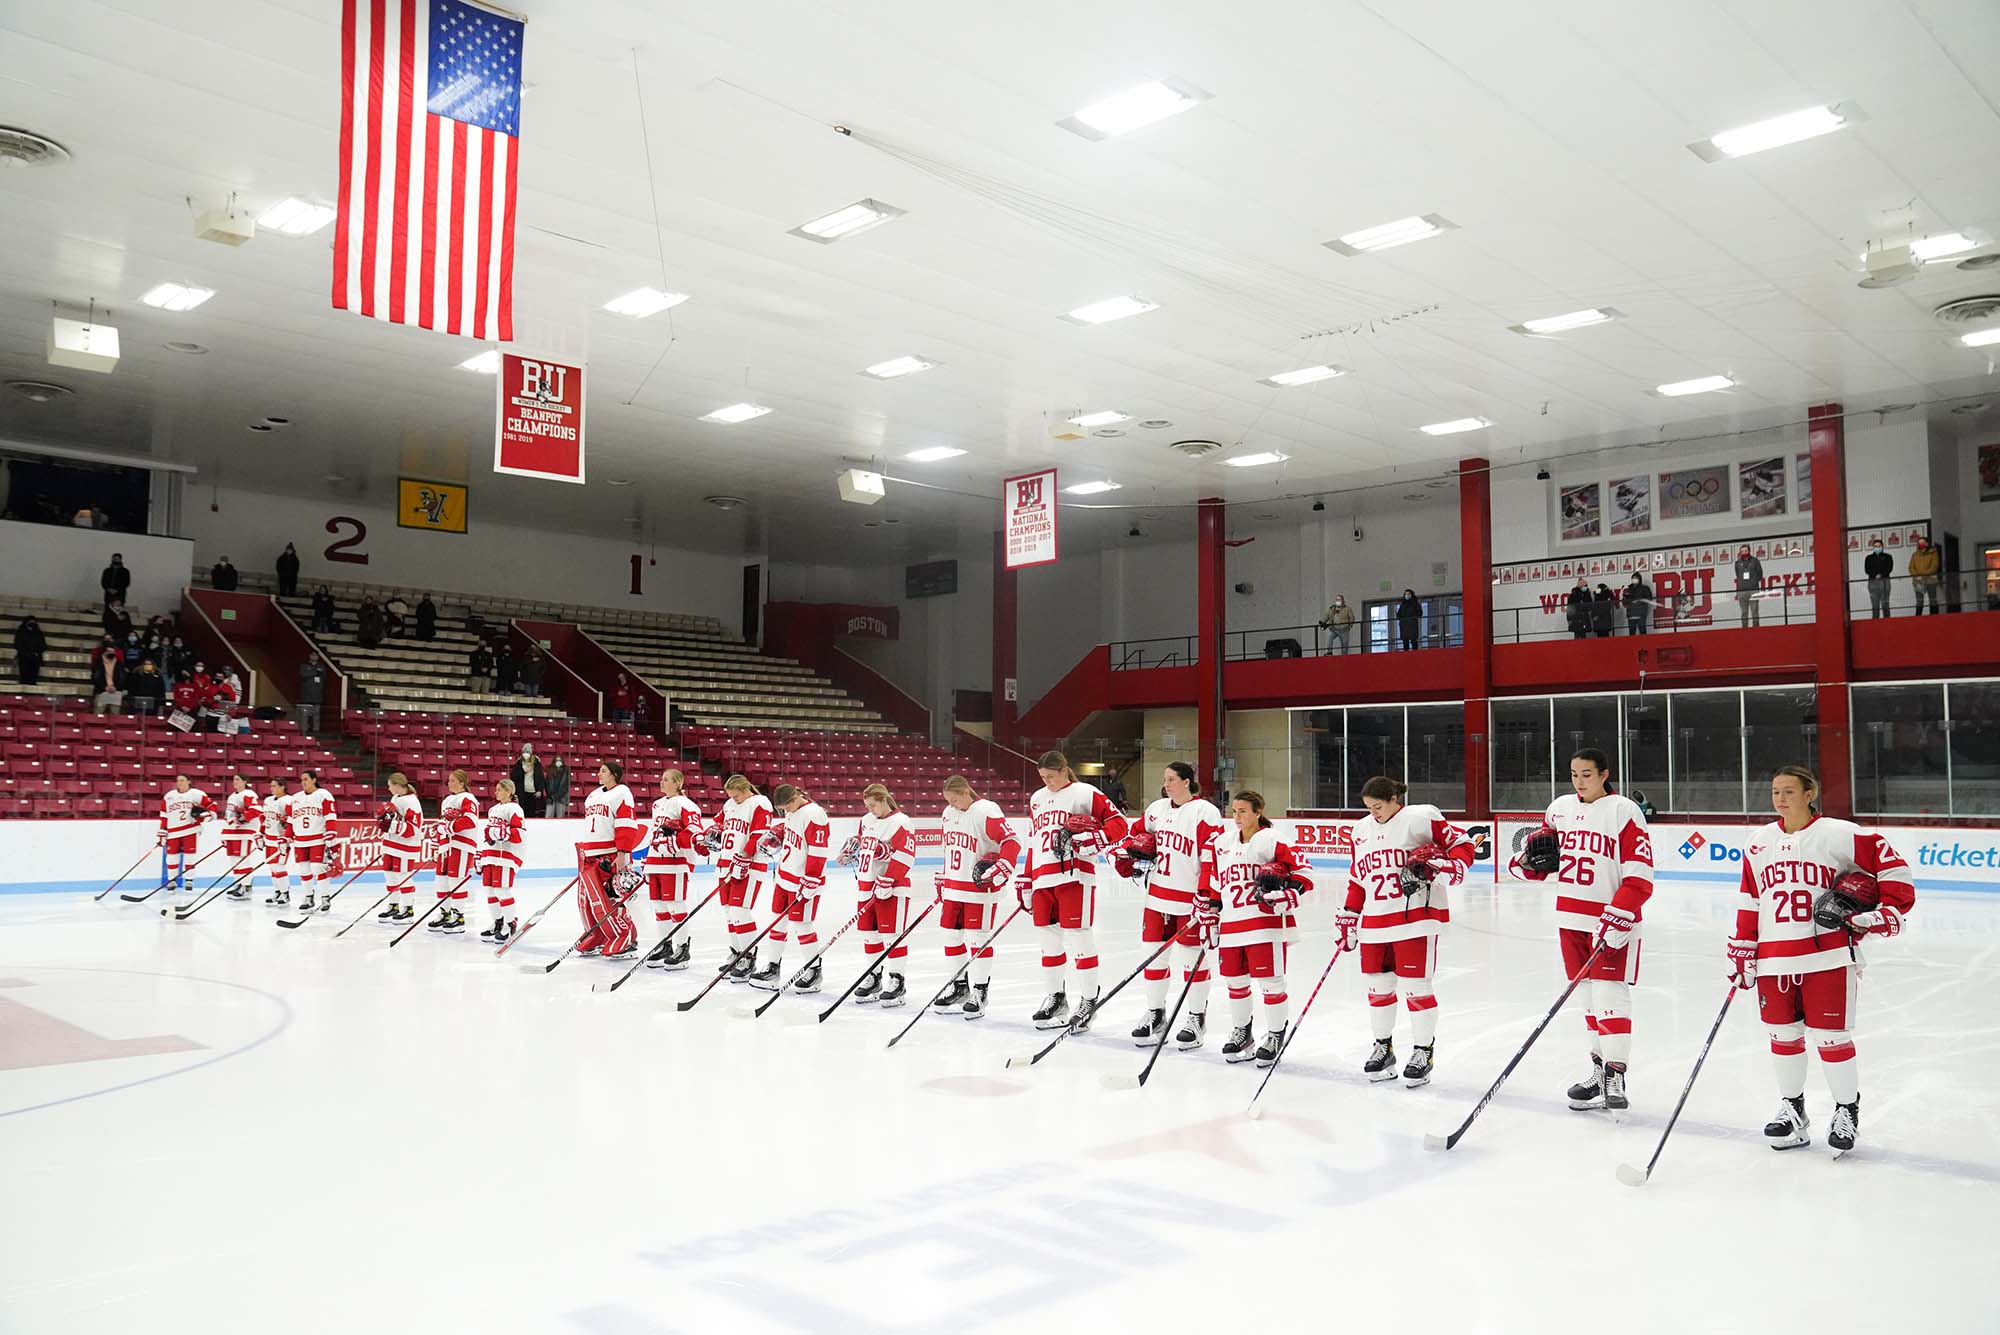 Photo of the BU Women's hockey team standing in a row across the ice with their helmets off and white and red home jerseys on, during the national anthem before the Jan 15 game at Walter Brown Arena. The American flag hangs from the ceiling.